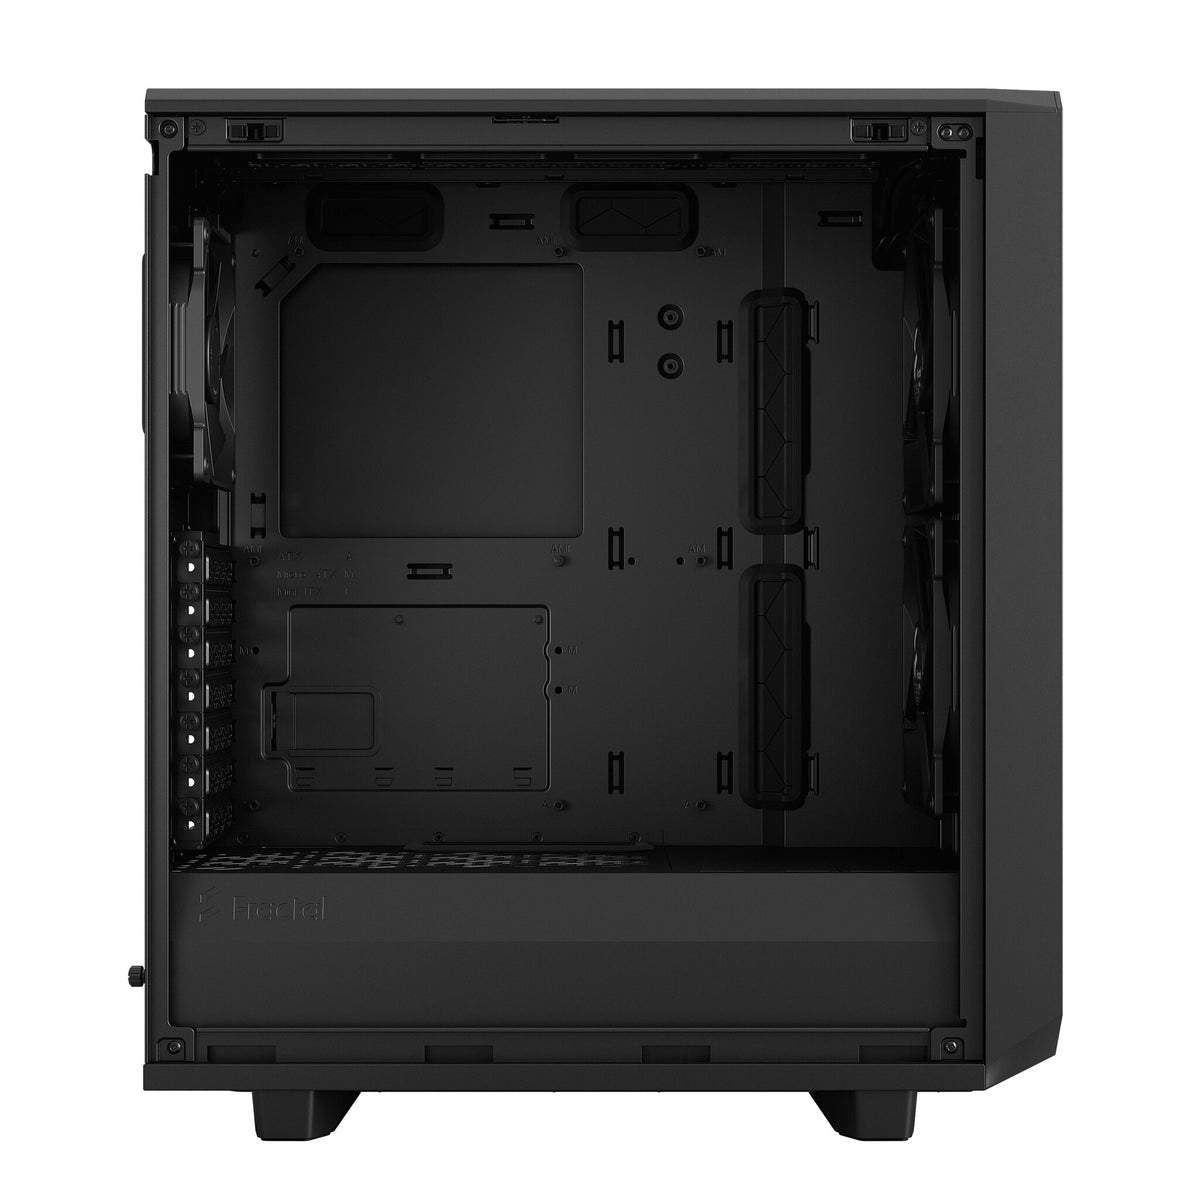 Fractal Design Meshify 2 Compact - ATX Mid Tower Case in Black